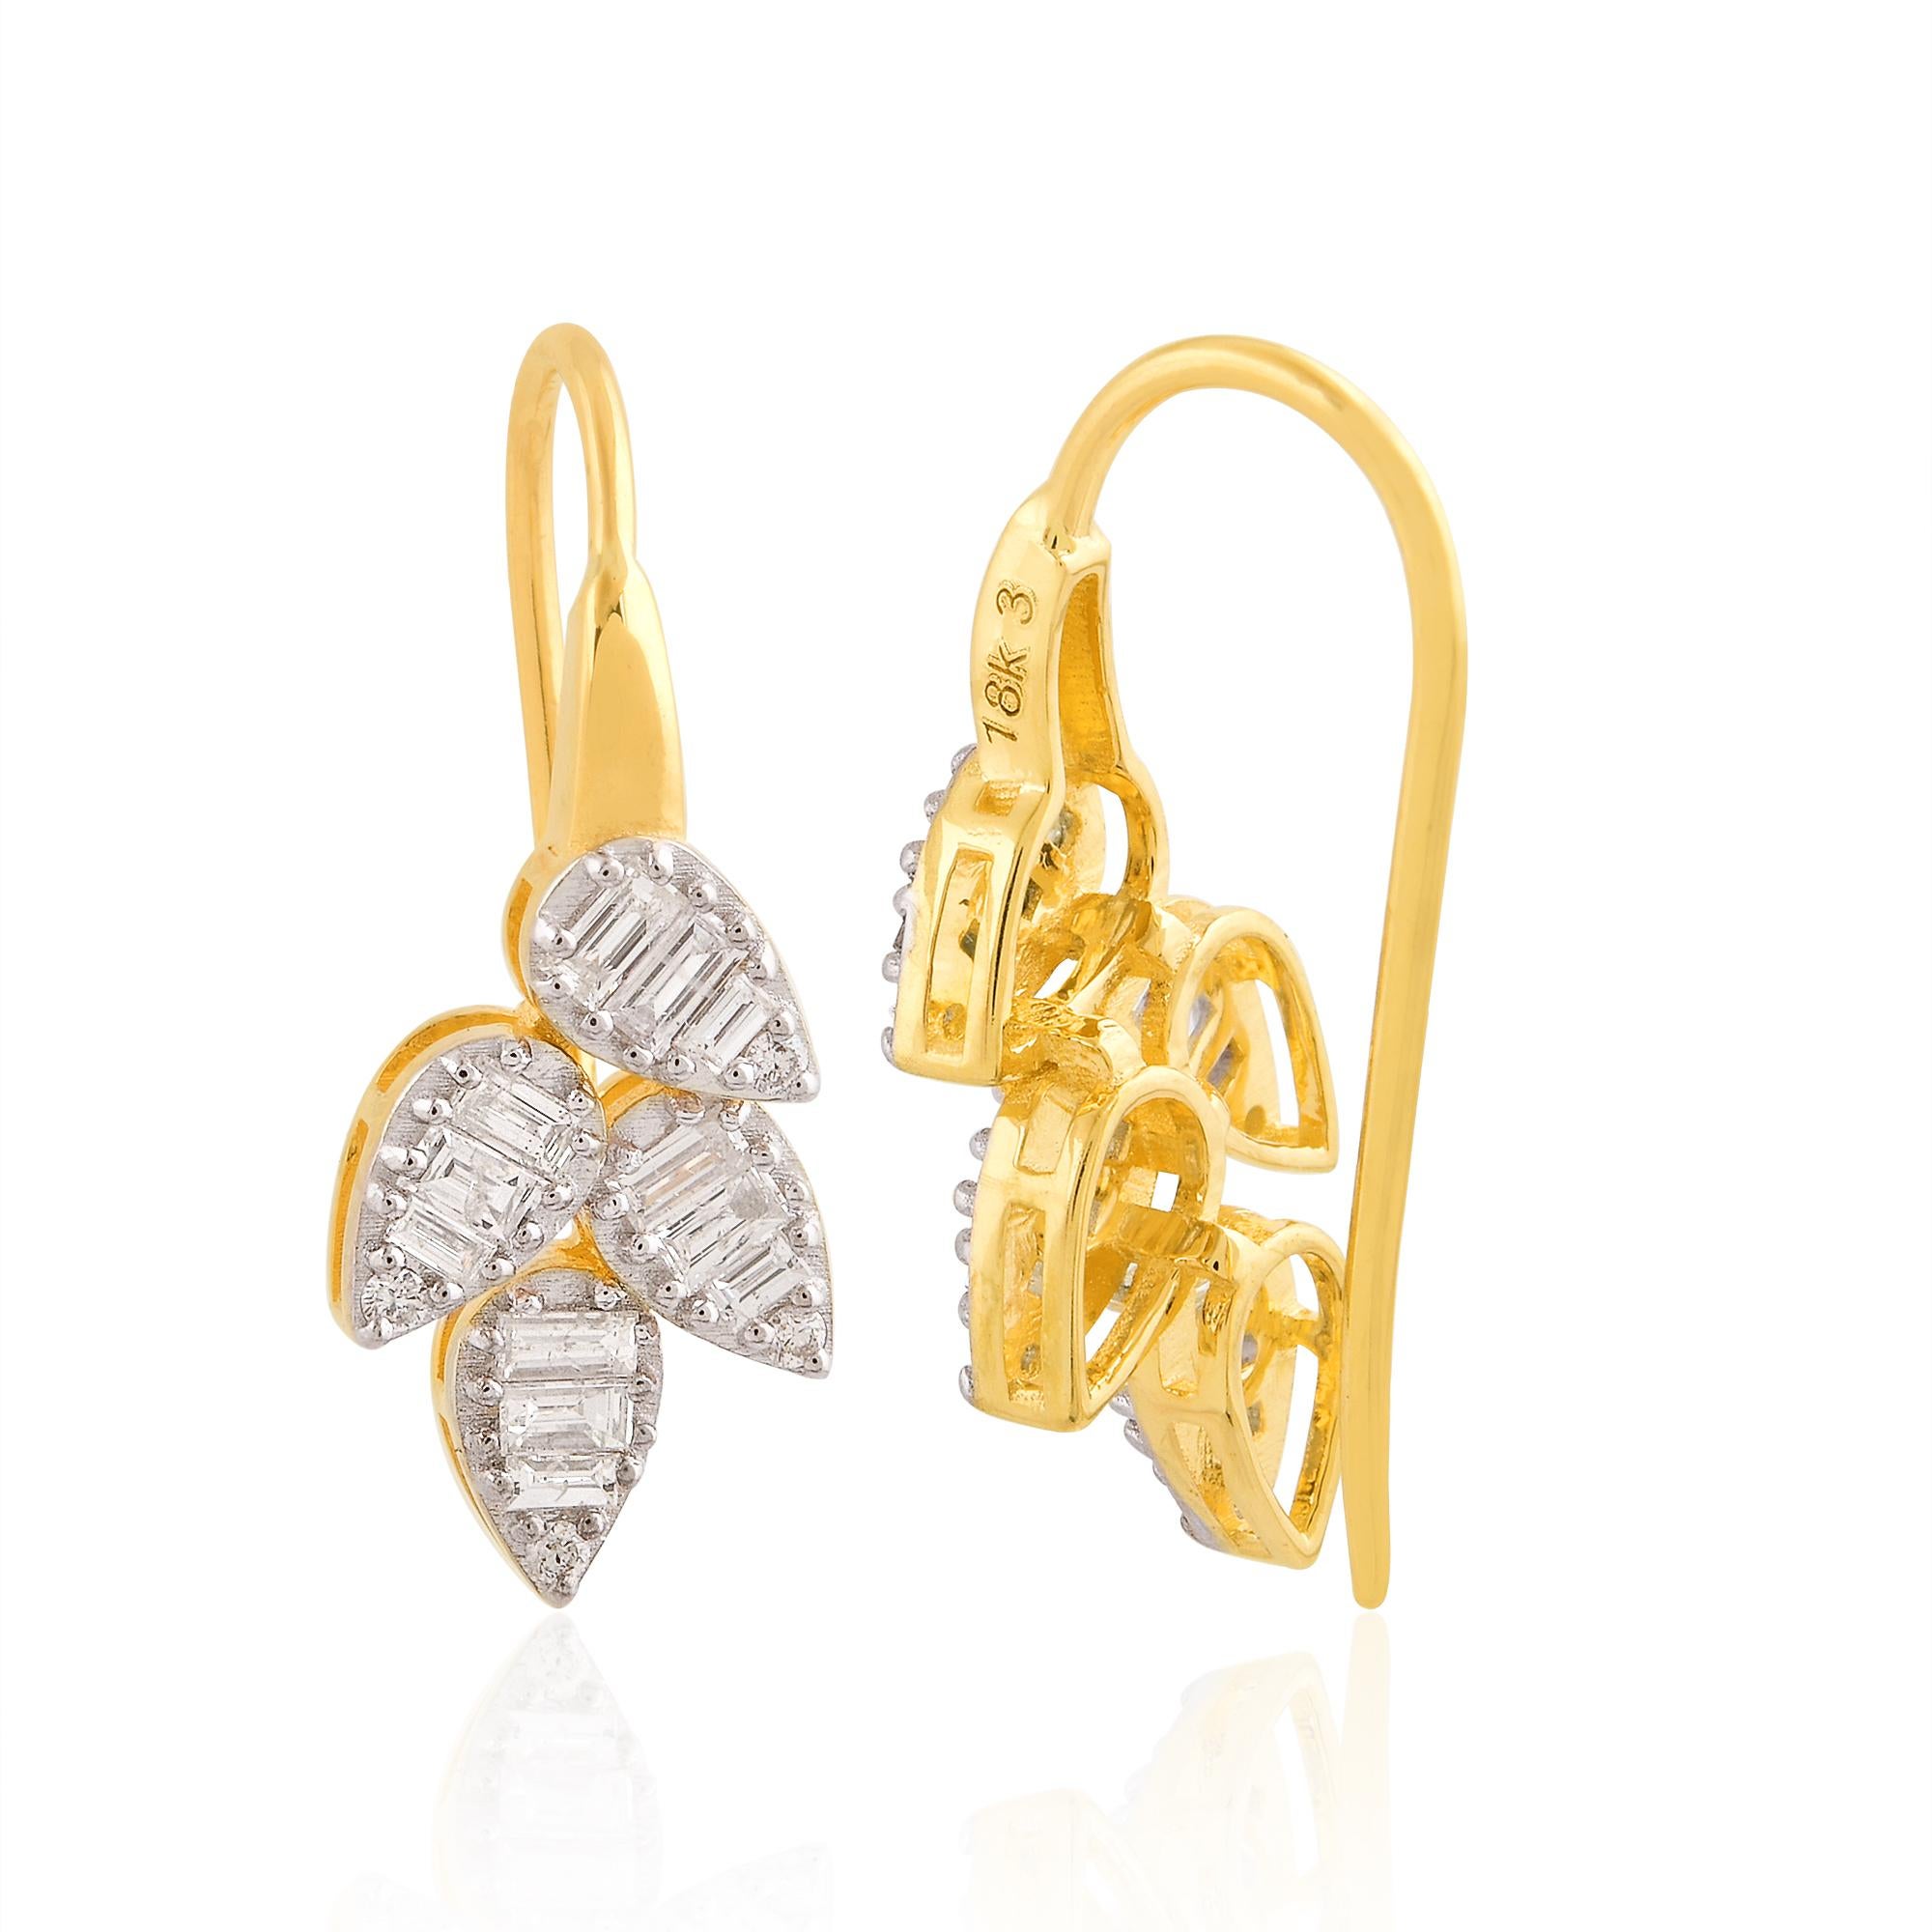 Code :- SEE-11626C
Gross Wt. :- 3.69 gram
18k Yellow Gold Wt. :-3.54 gram
Natural Diamond Wt. :- 0.75 Ct. ( SI Clarity & HI Color )
Earrings Size :- 23 mm approx.

✦ Sizing
.....................
We can adjust most items to fit your sizing